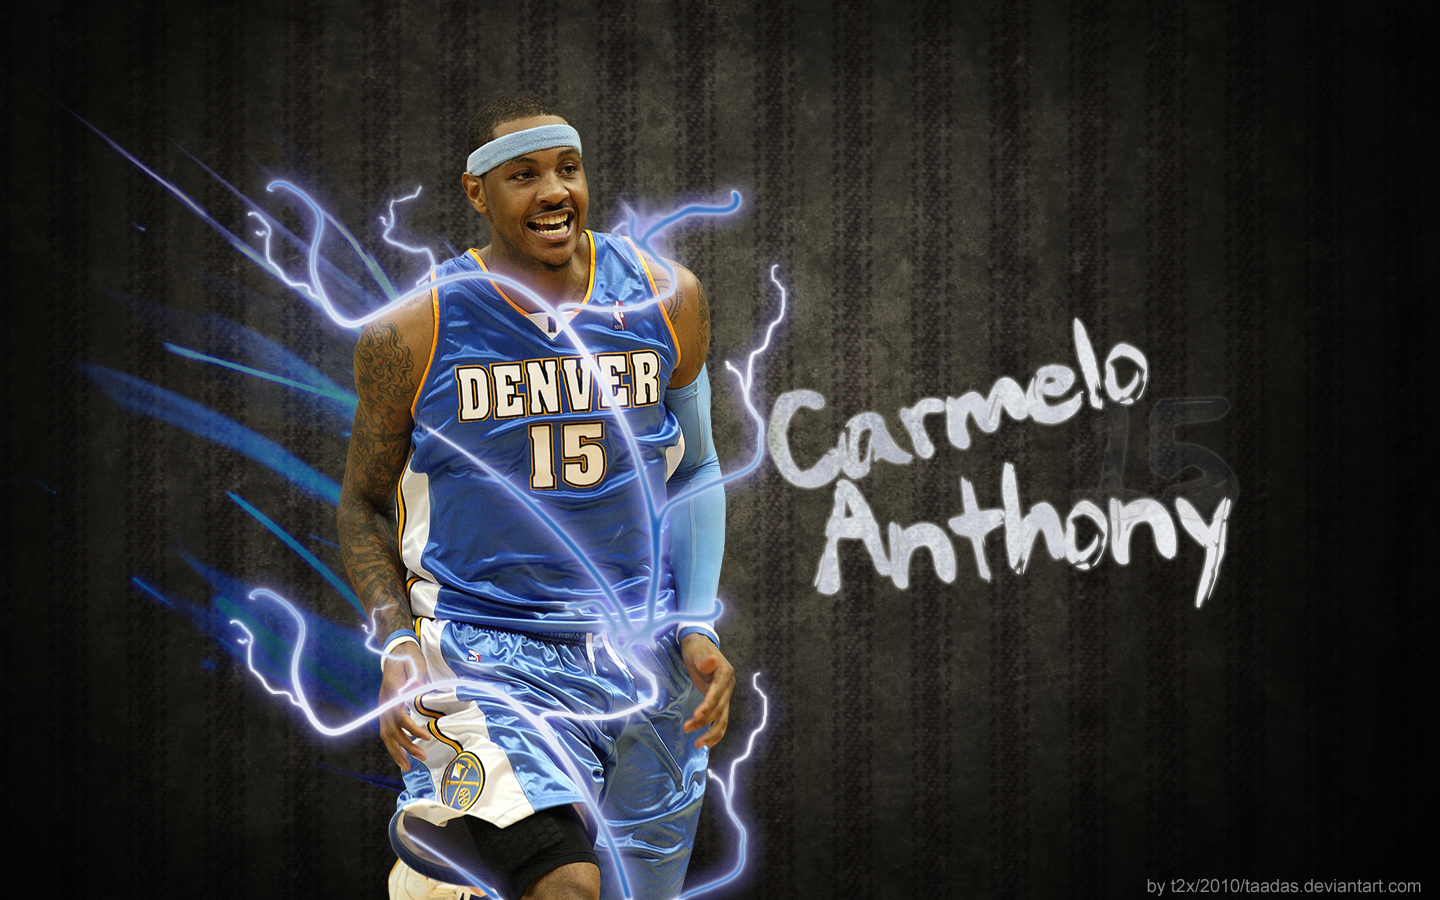 carmelo anthony wallpaper,basketball player,basketball,font,basketball autographed paraphernalia,basketball moves